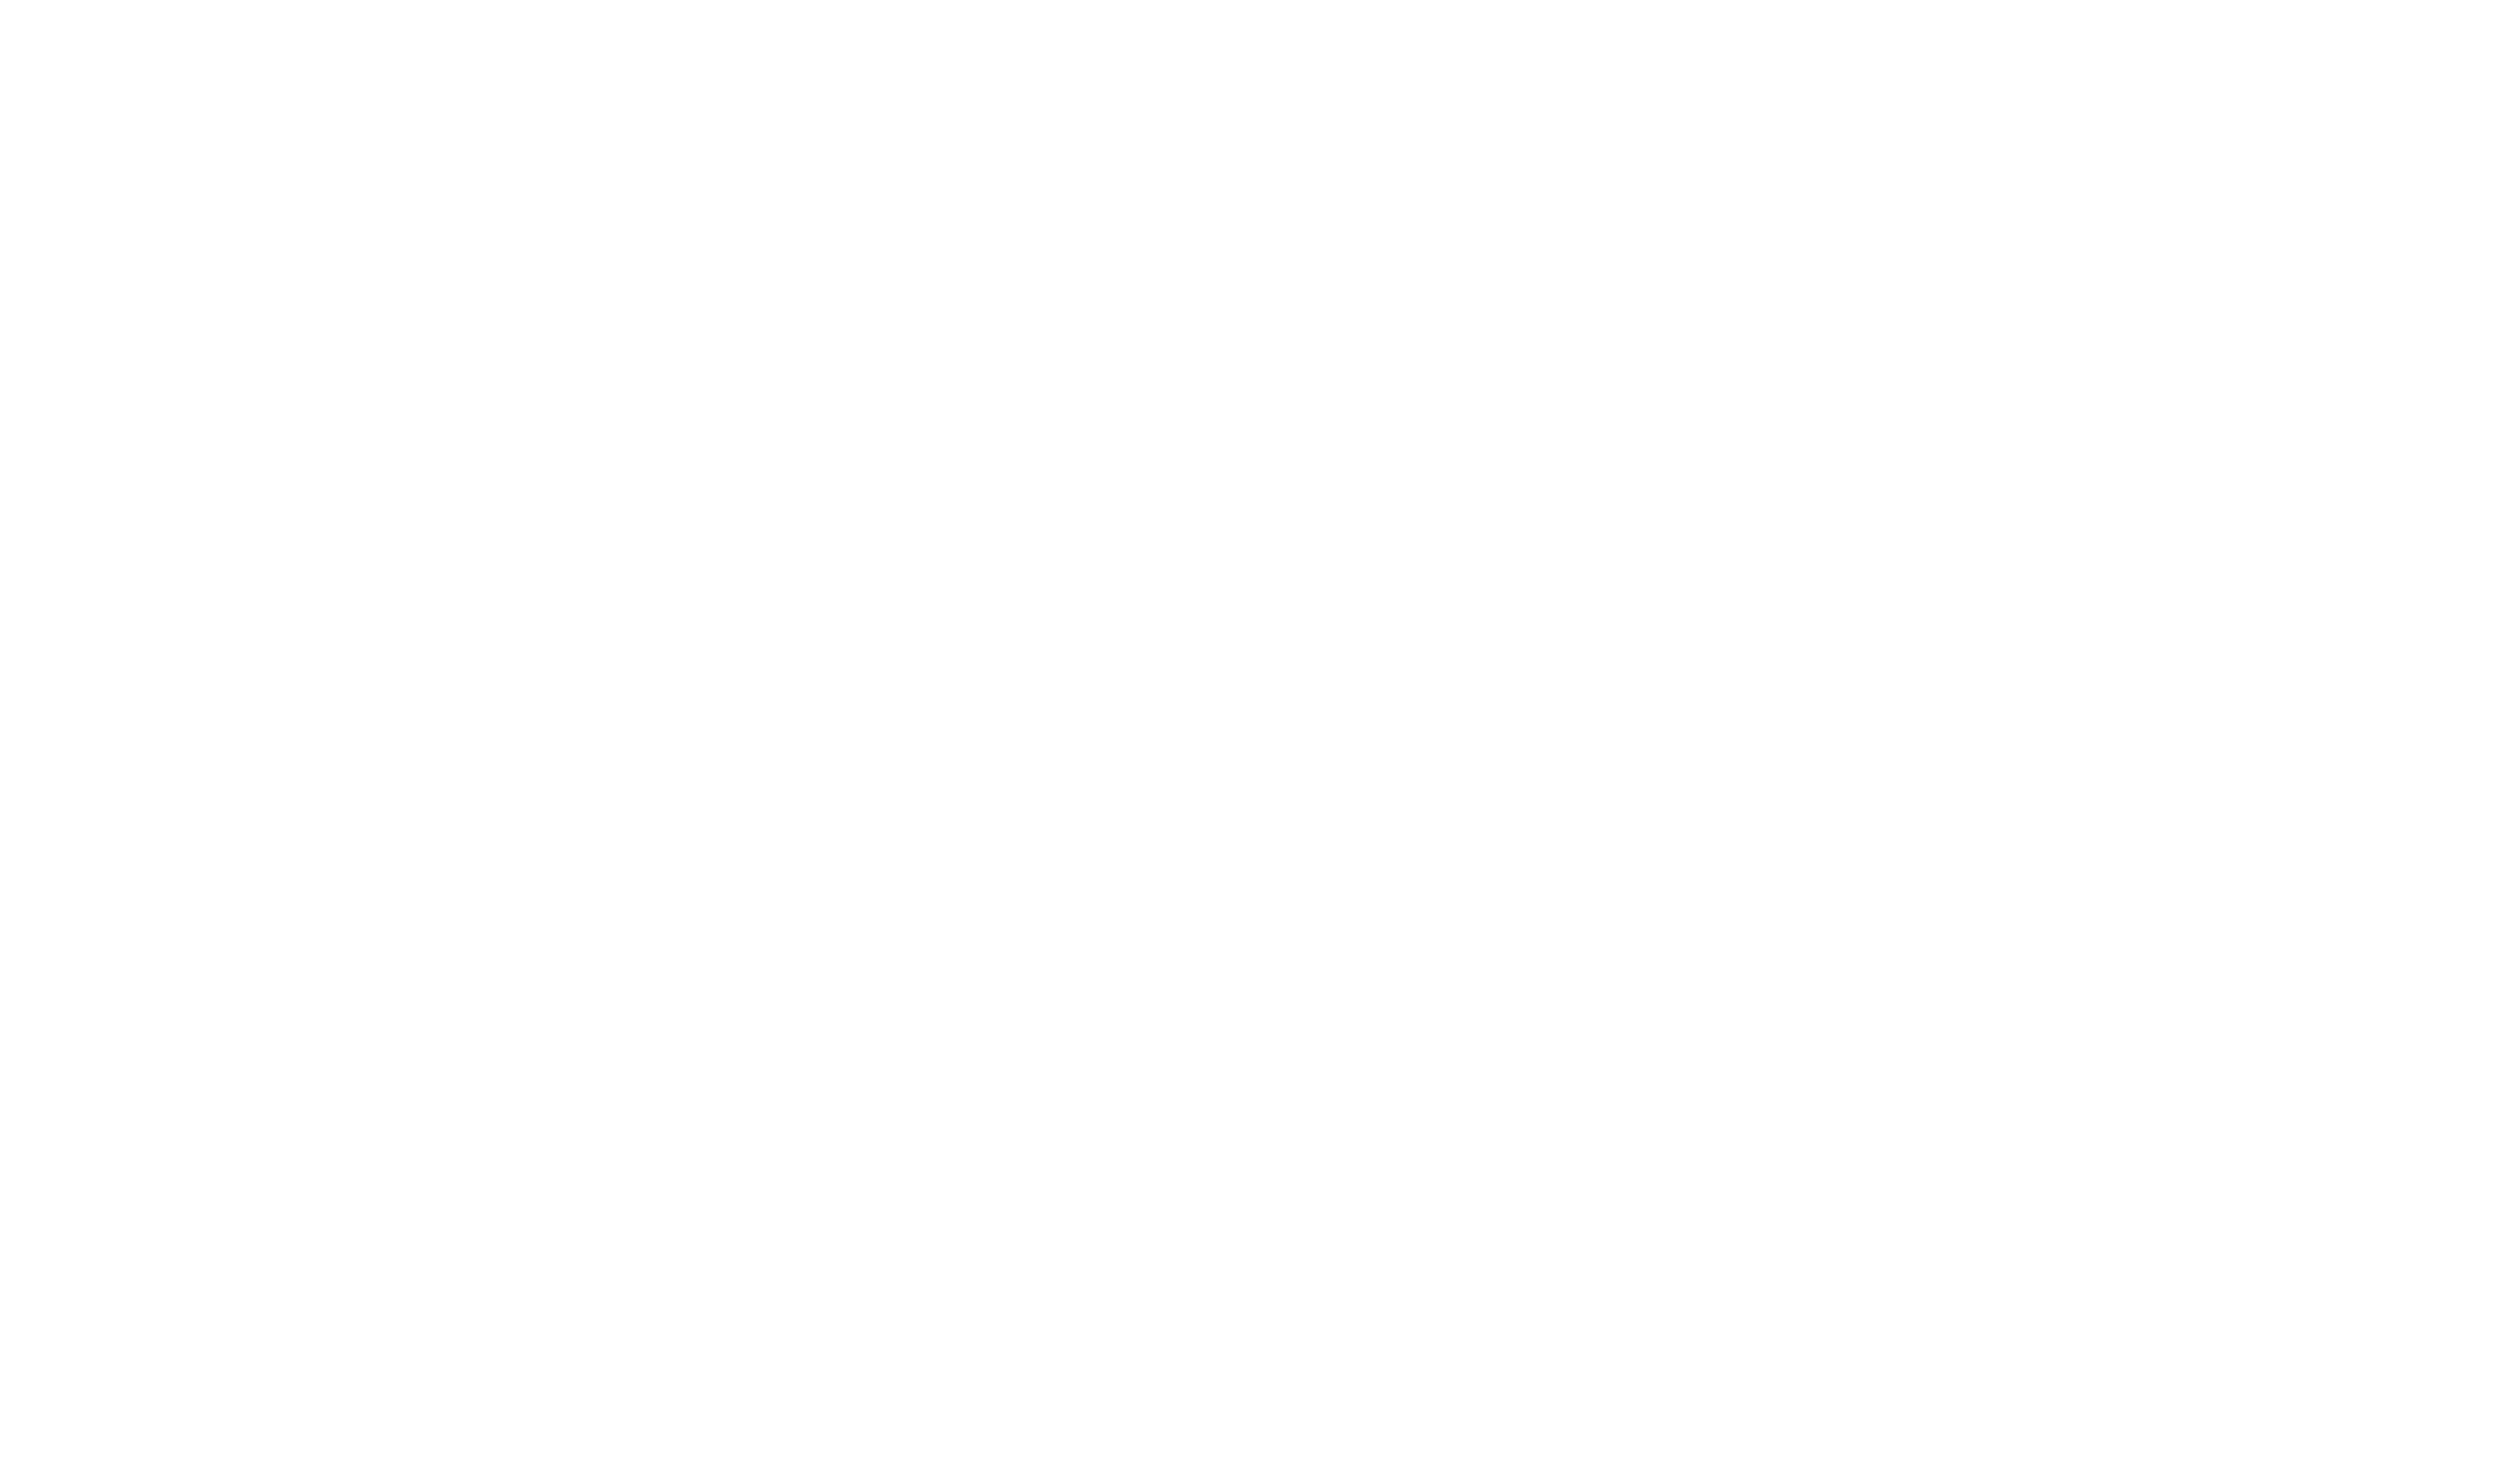 The Greatest Of All Time logo